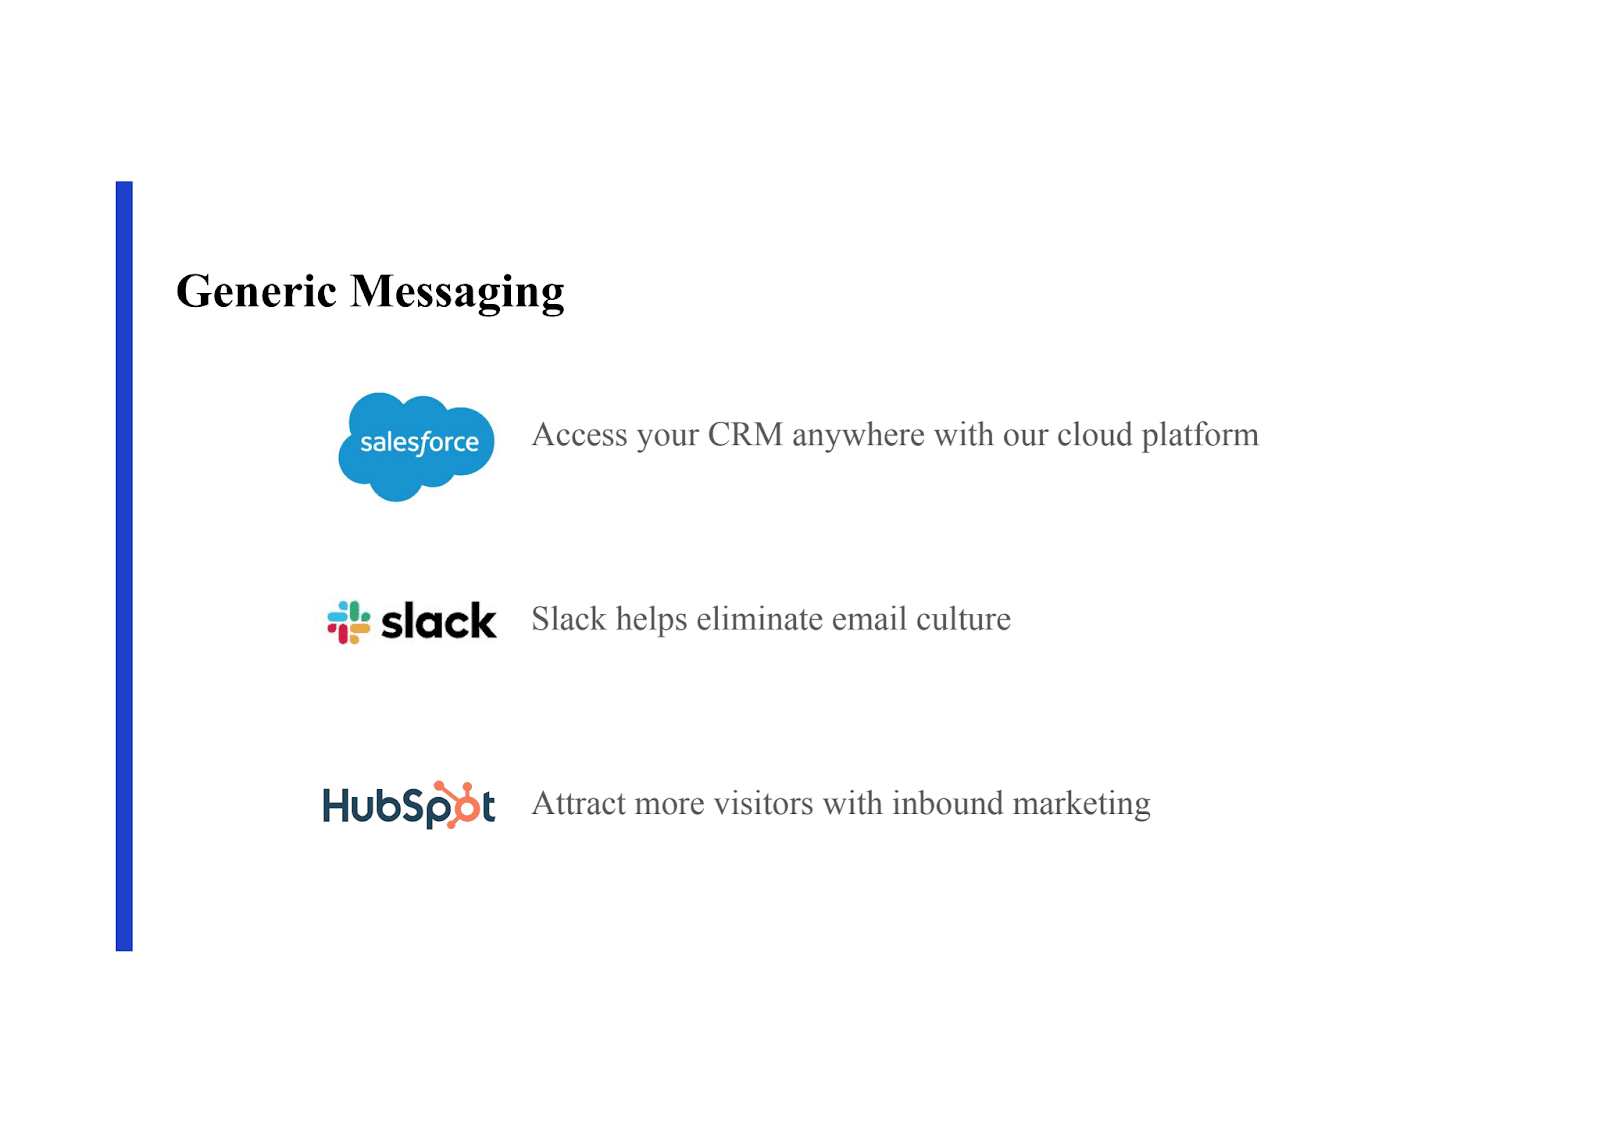 Three examples of generic messaging. Salesforce: "Access your CRM anywhere with our cloud platform". Slack: "Helps eliminate email culture". Hubspot: "Attract more visitors with inbound marketing".